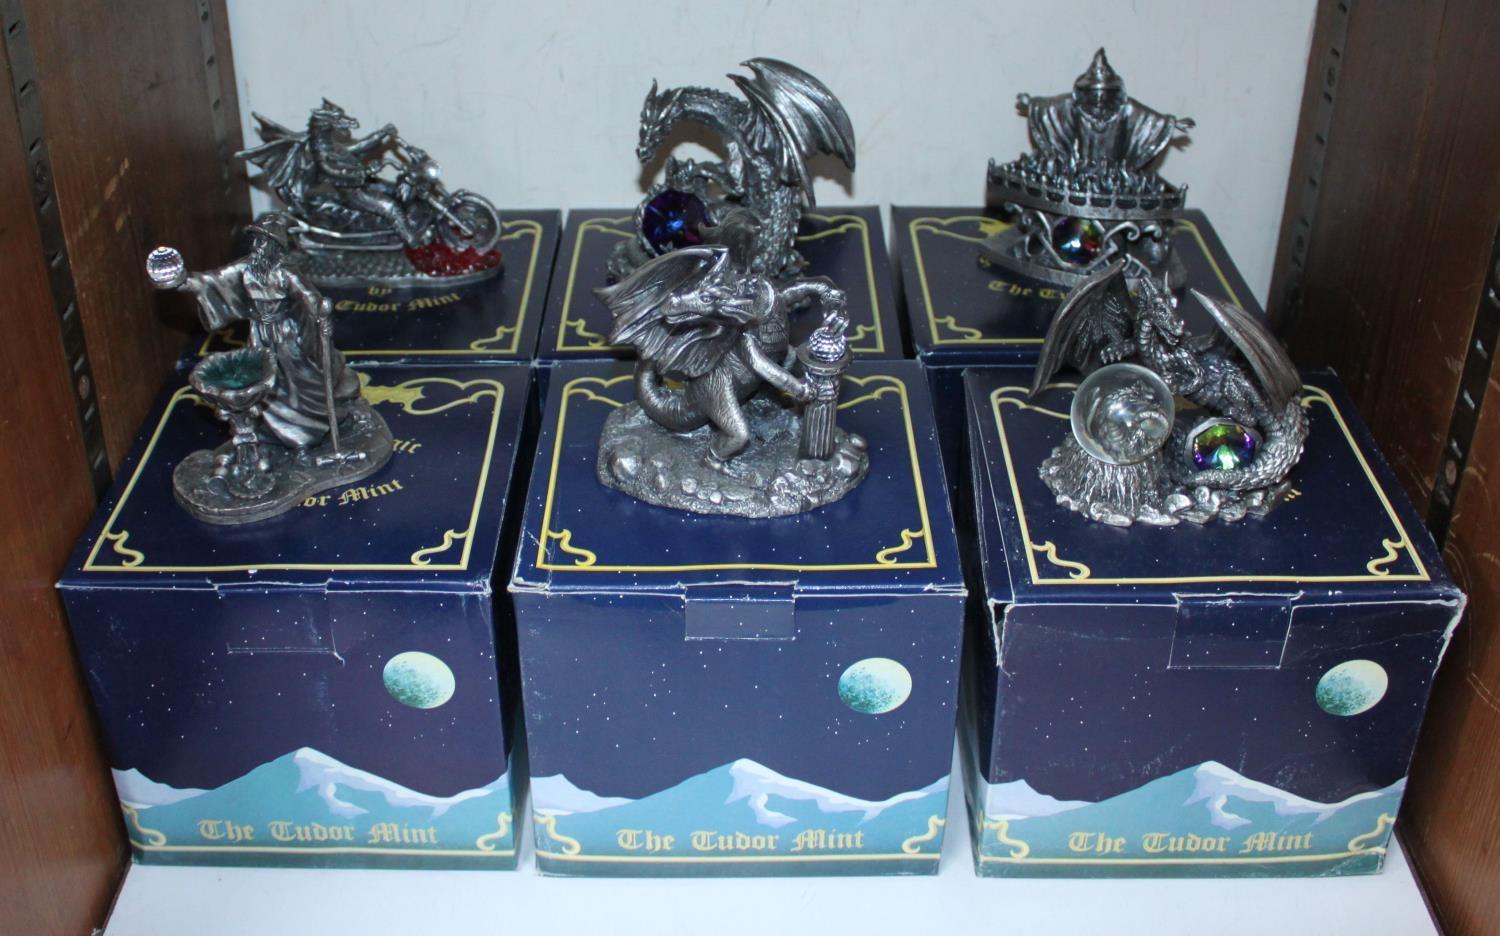 SECTION 27. Six pewter and crystal figures from The Tudor Mint collection, including dragons,